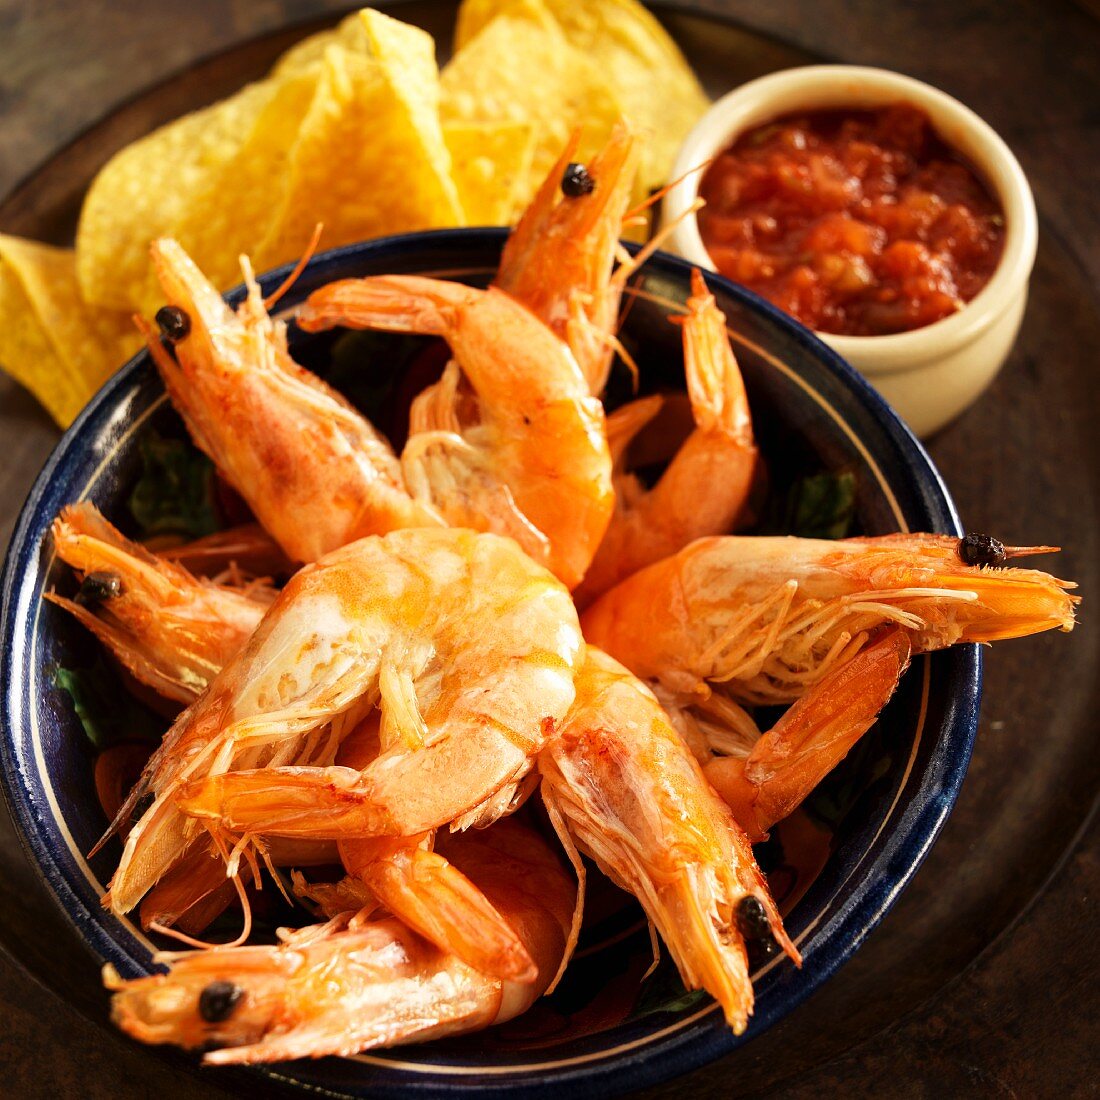 Bowl of Whole Shrimp with Tortilla Chips and Salsa